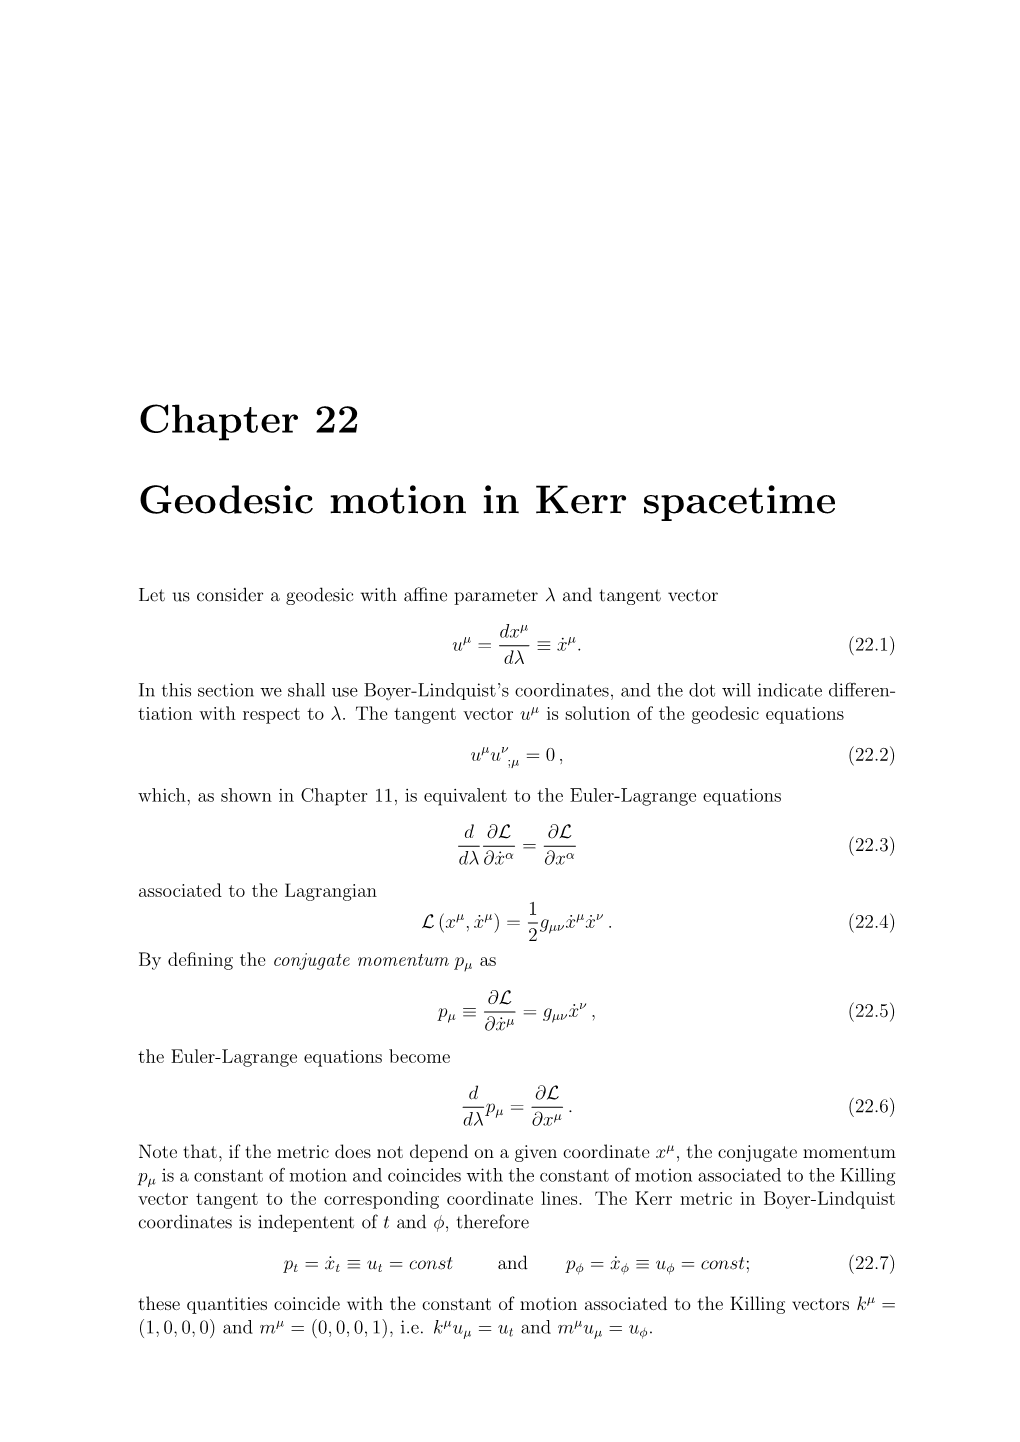 Chapter 22 Geodesic Motion in Kerr Spacetime